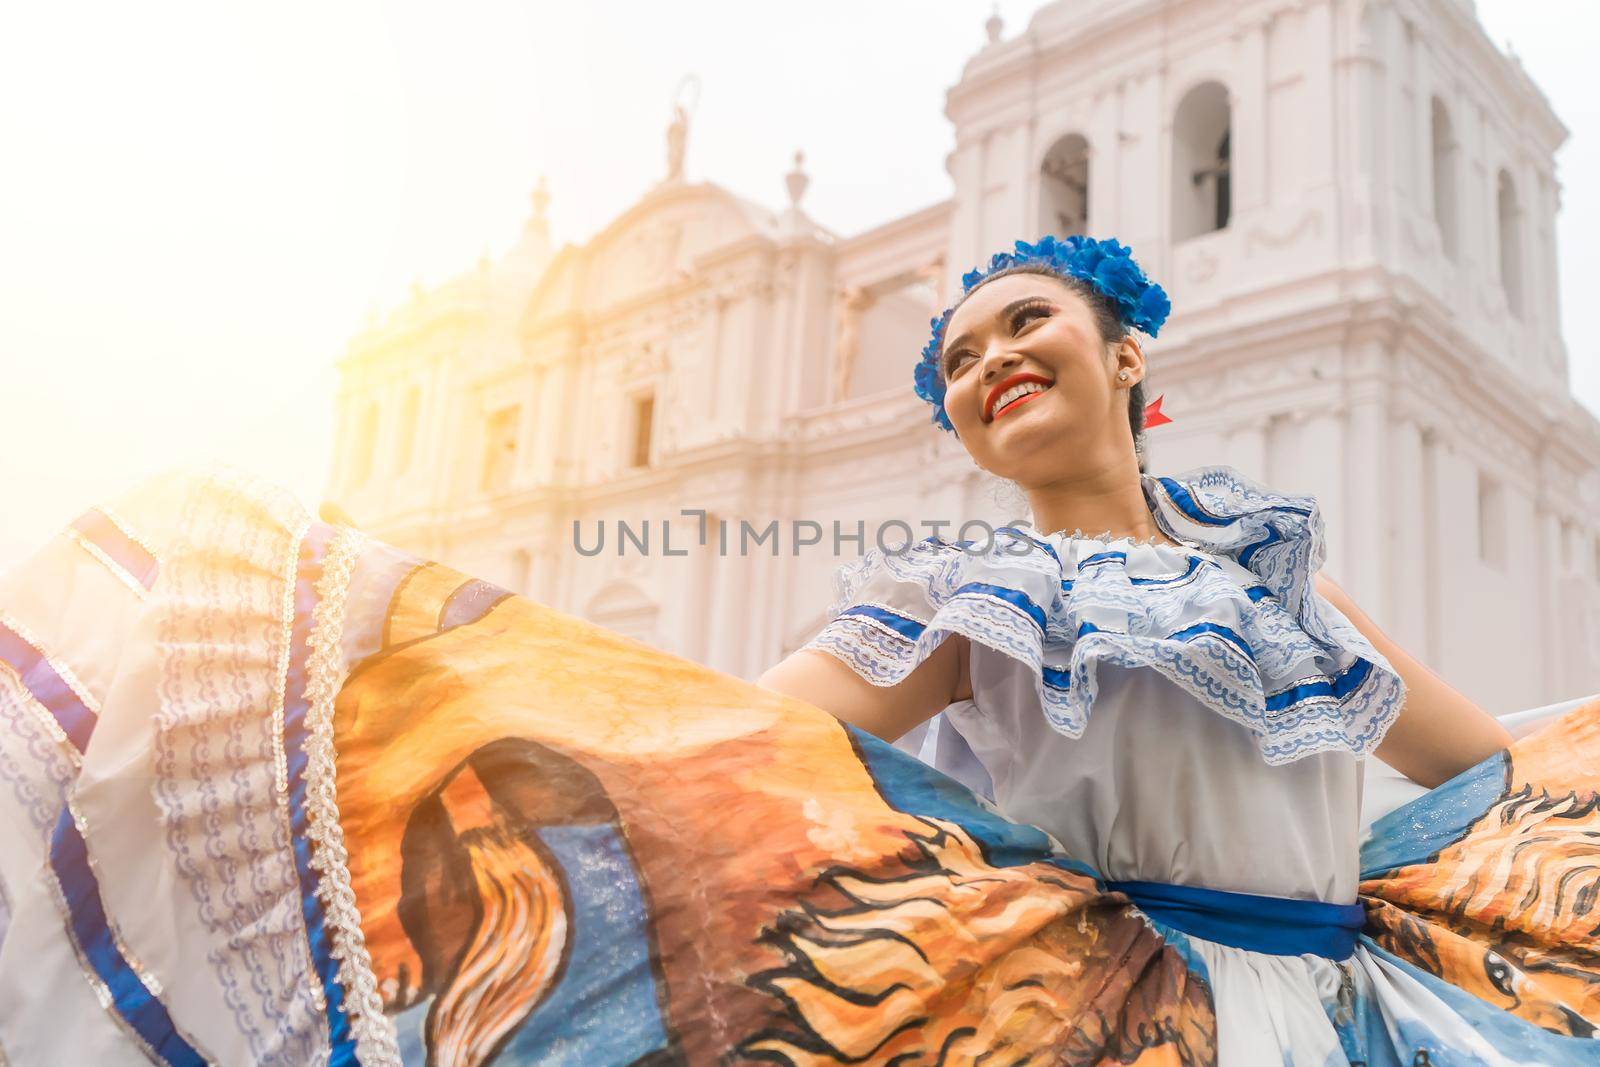 Traditional dancer with a typical Nicaraguan costume dancing outside the cathedral of Leon Nicaragua celebrating the Central America independence festivities.